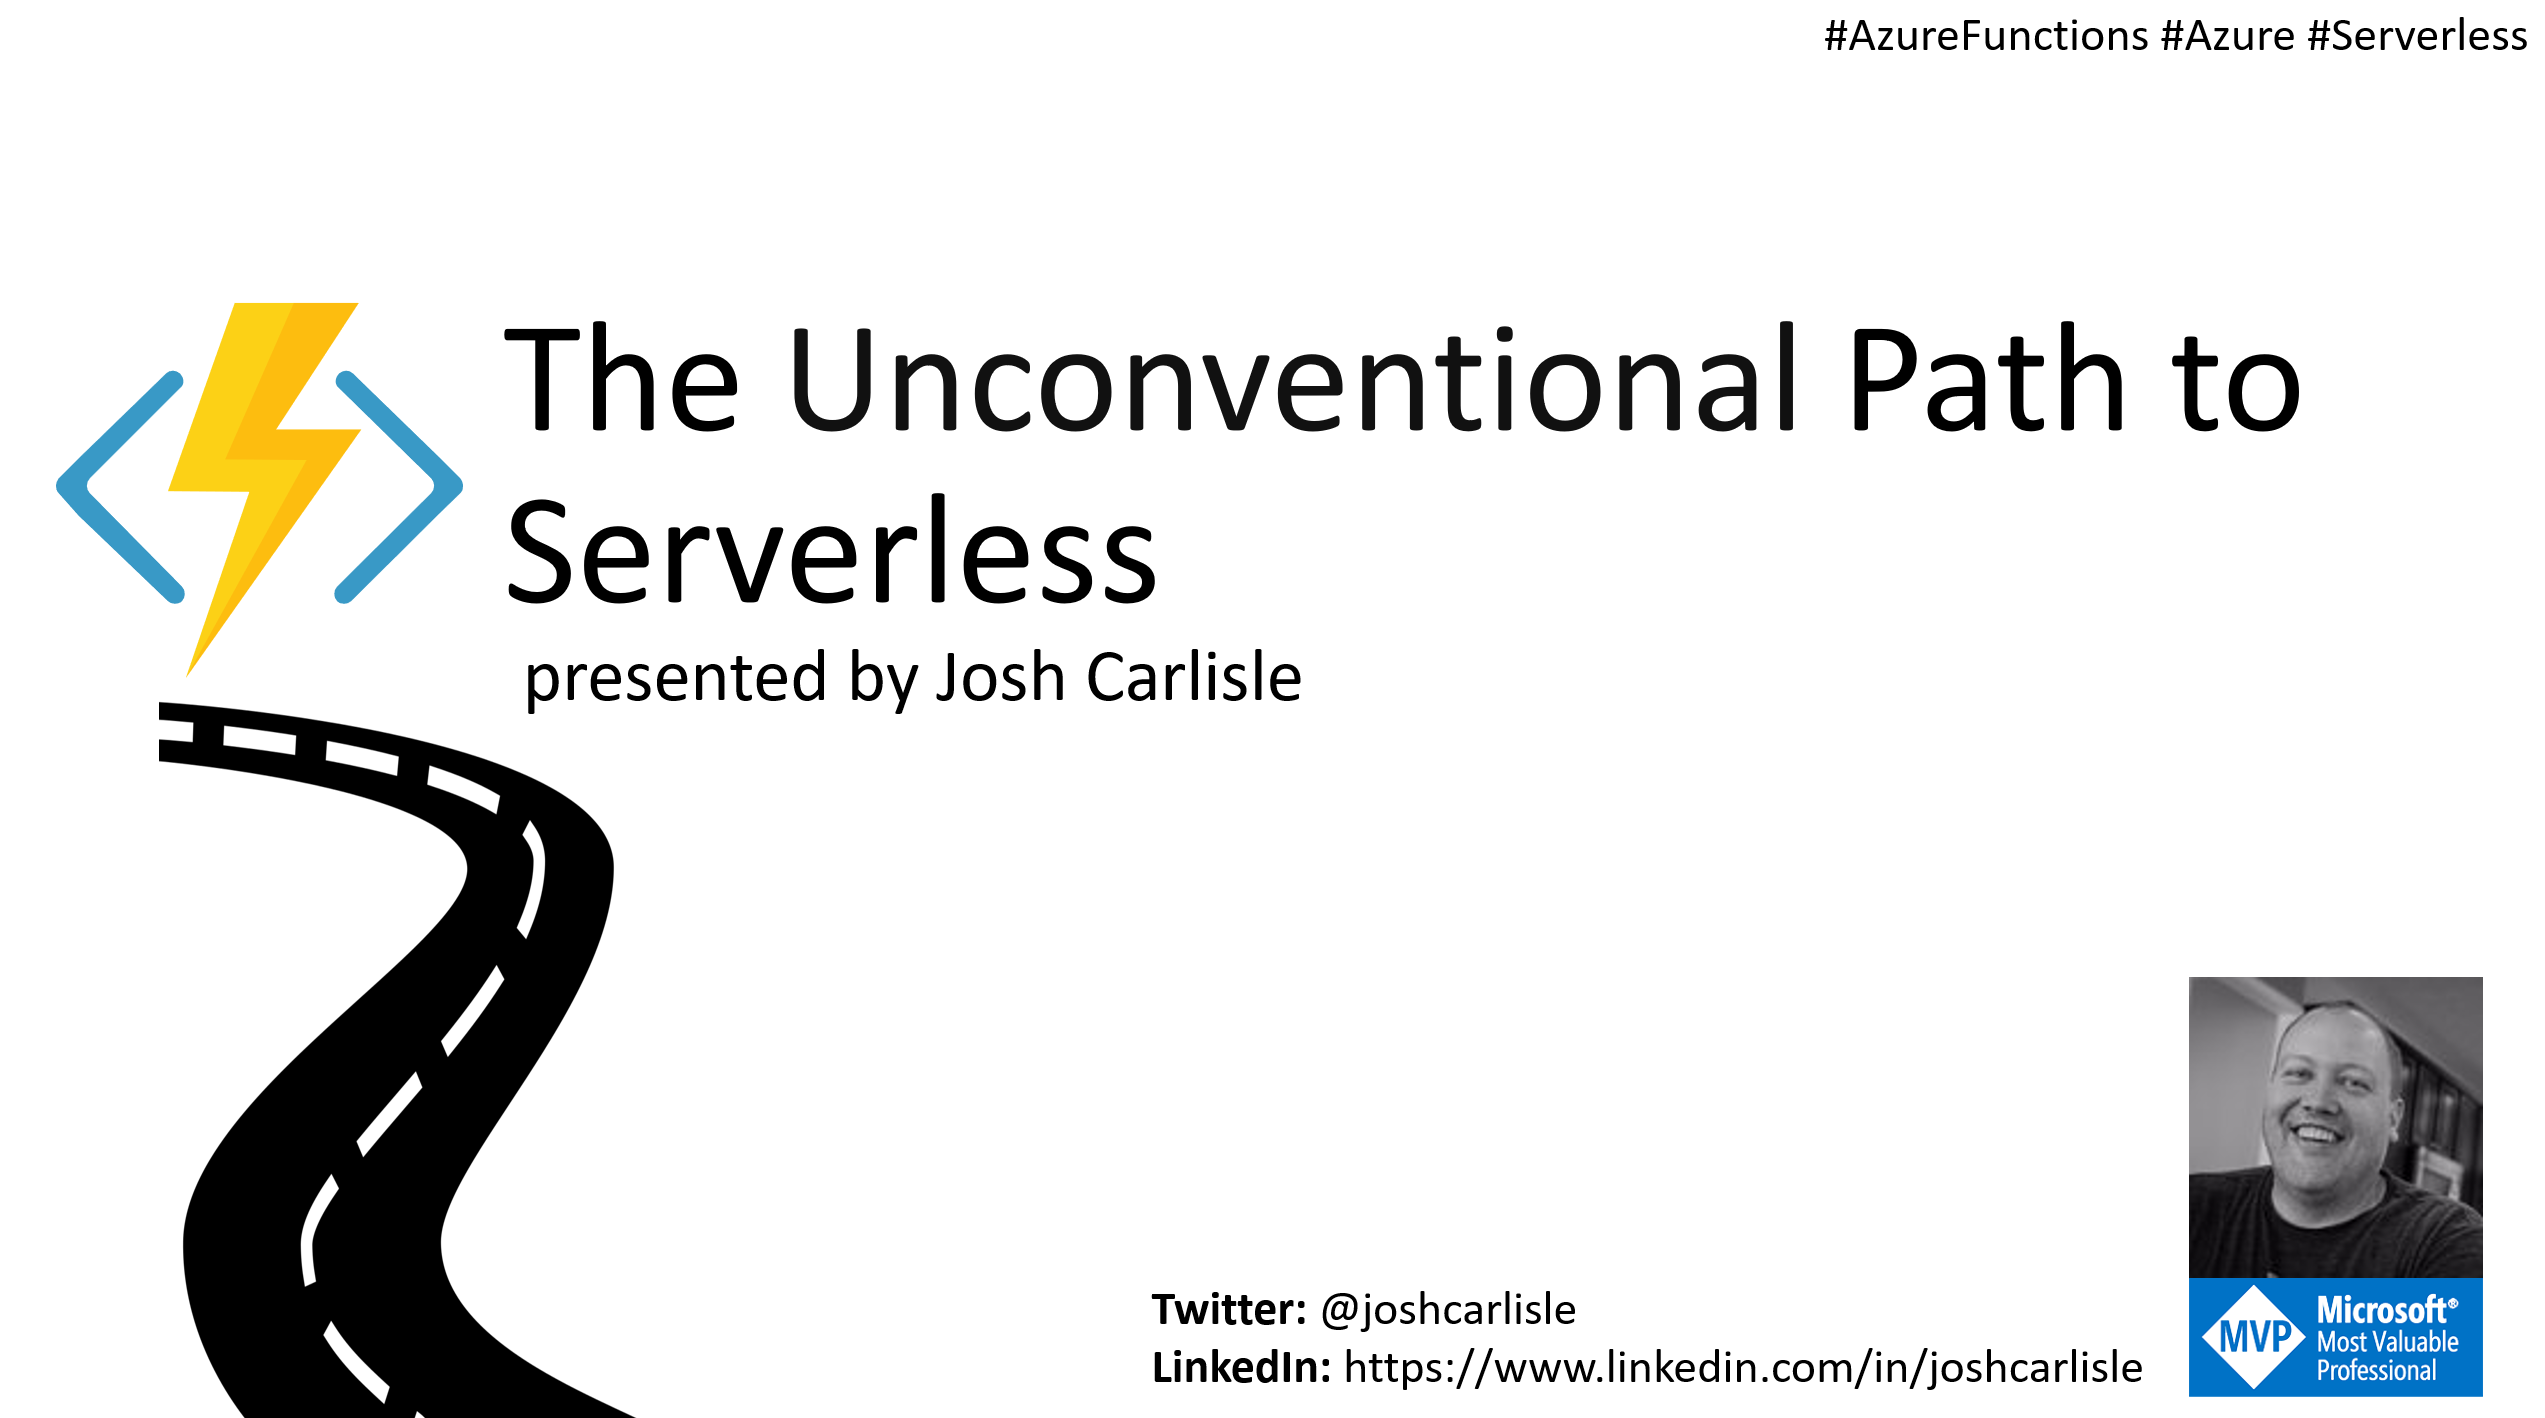 Charlotte Azure Meetup - The Unconventional Path to Serverless